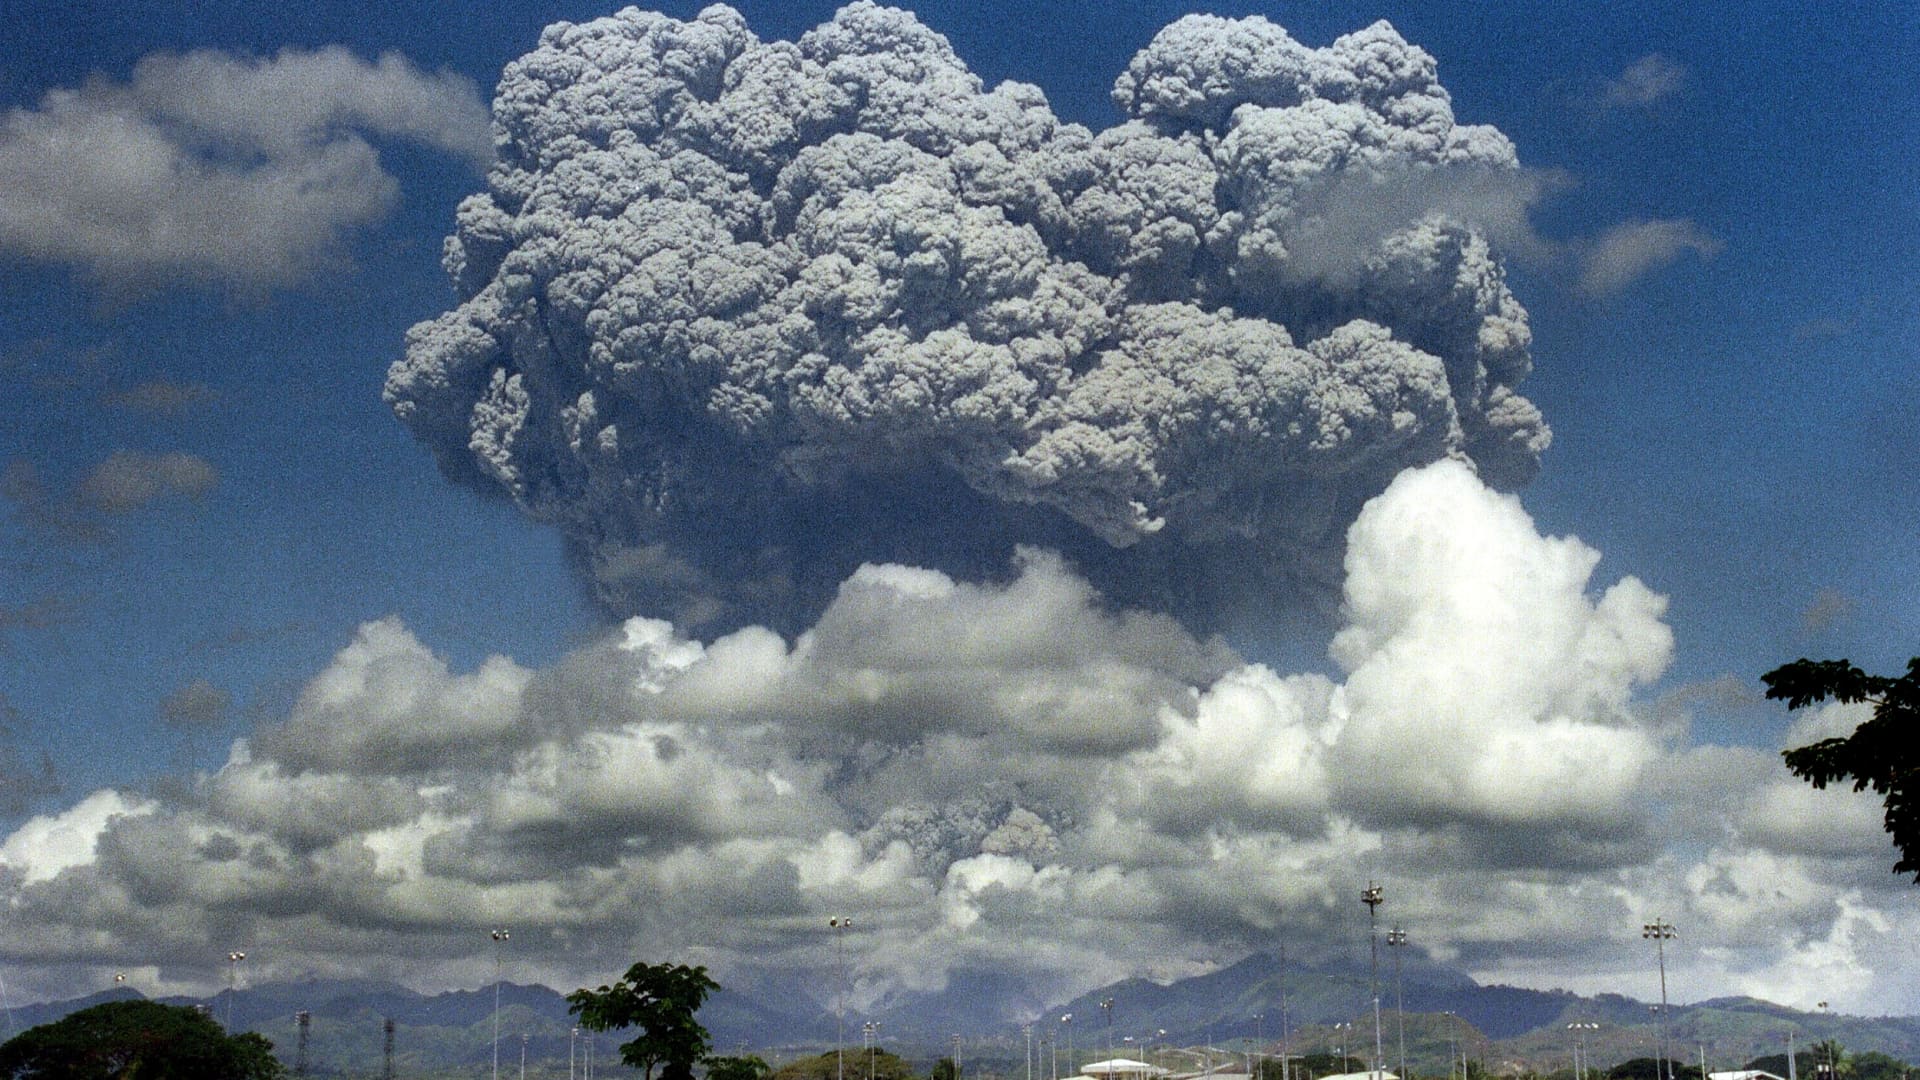 A giant volcanic mushroom cloud explodes some 20 kilometers high from Mount Pinatubo above almost deserted US Clark Air Base, on June 12, 1991 followed by another more powerful explosion. The eruption of Mount Pinatubo on June 15, 1991 was the second largest volcanic eruption of the twentieth century.